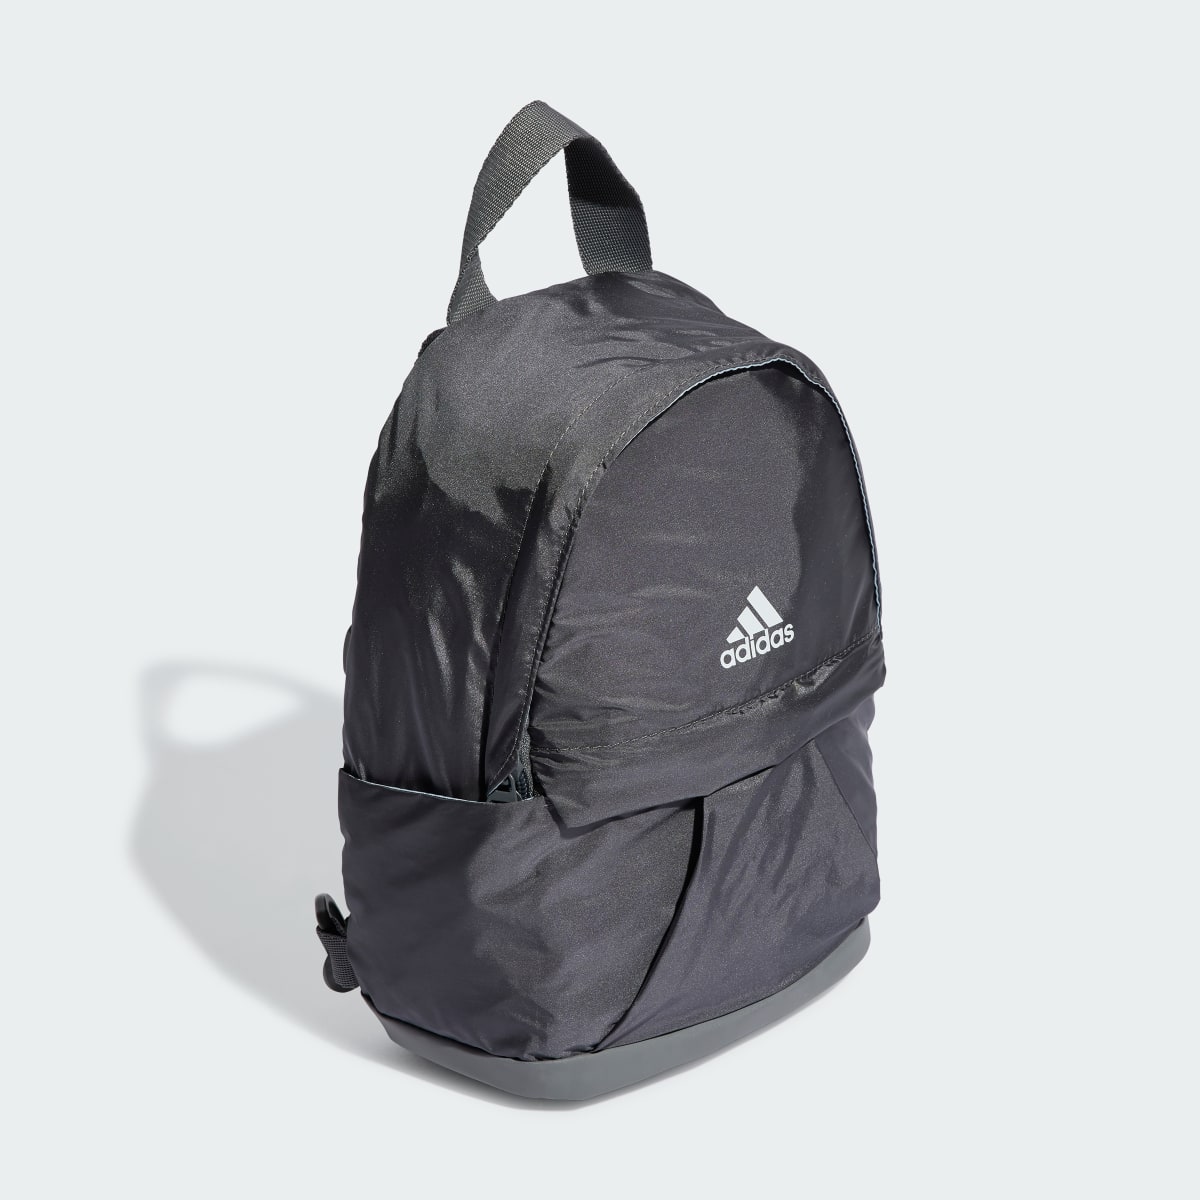 Adidas Classic Gen Z Backpack Extra Small. 4